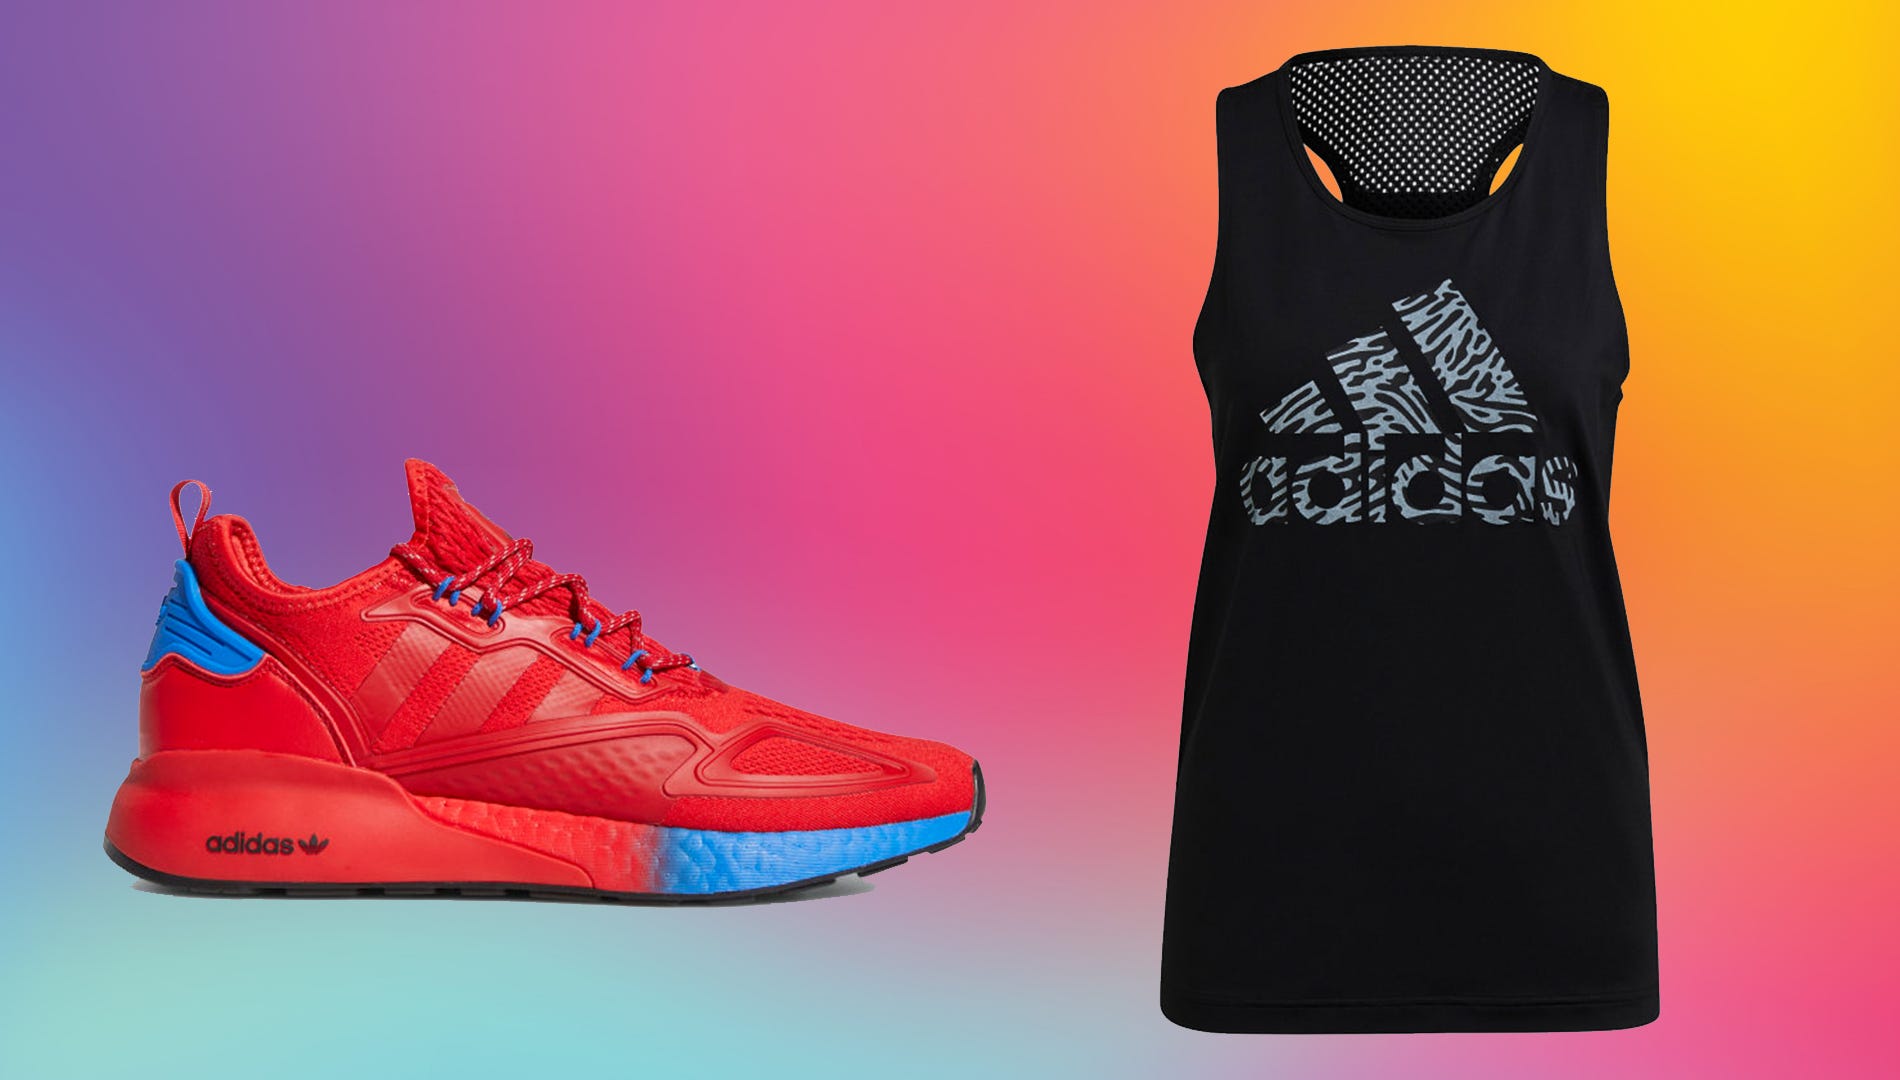 adidas shoes: Shop the brand's top-rated sneakers for up to 50% off + 10%